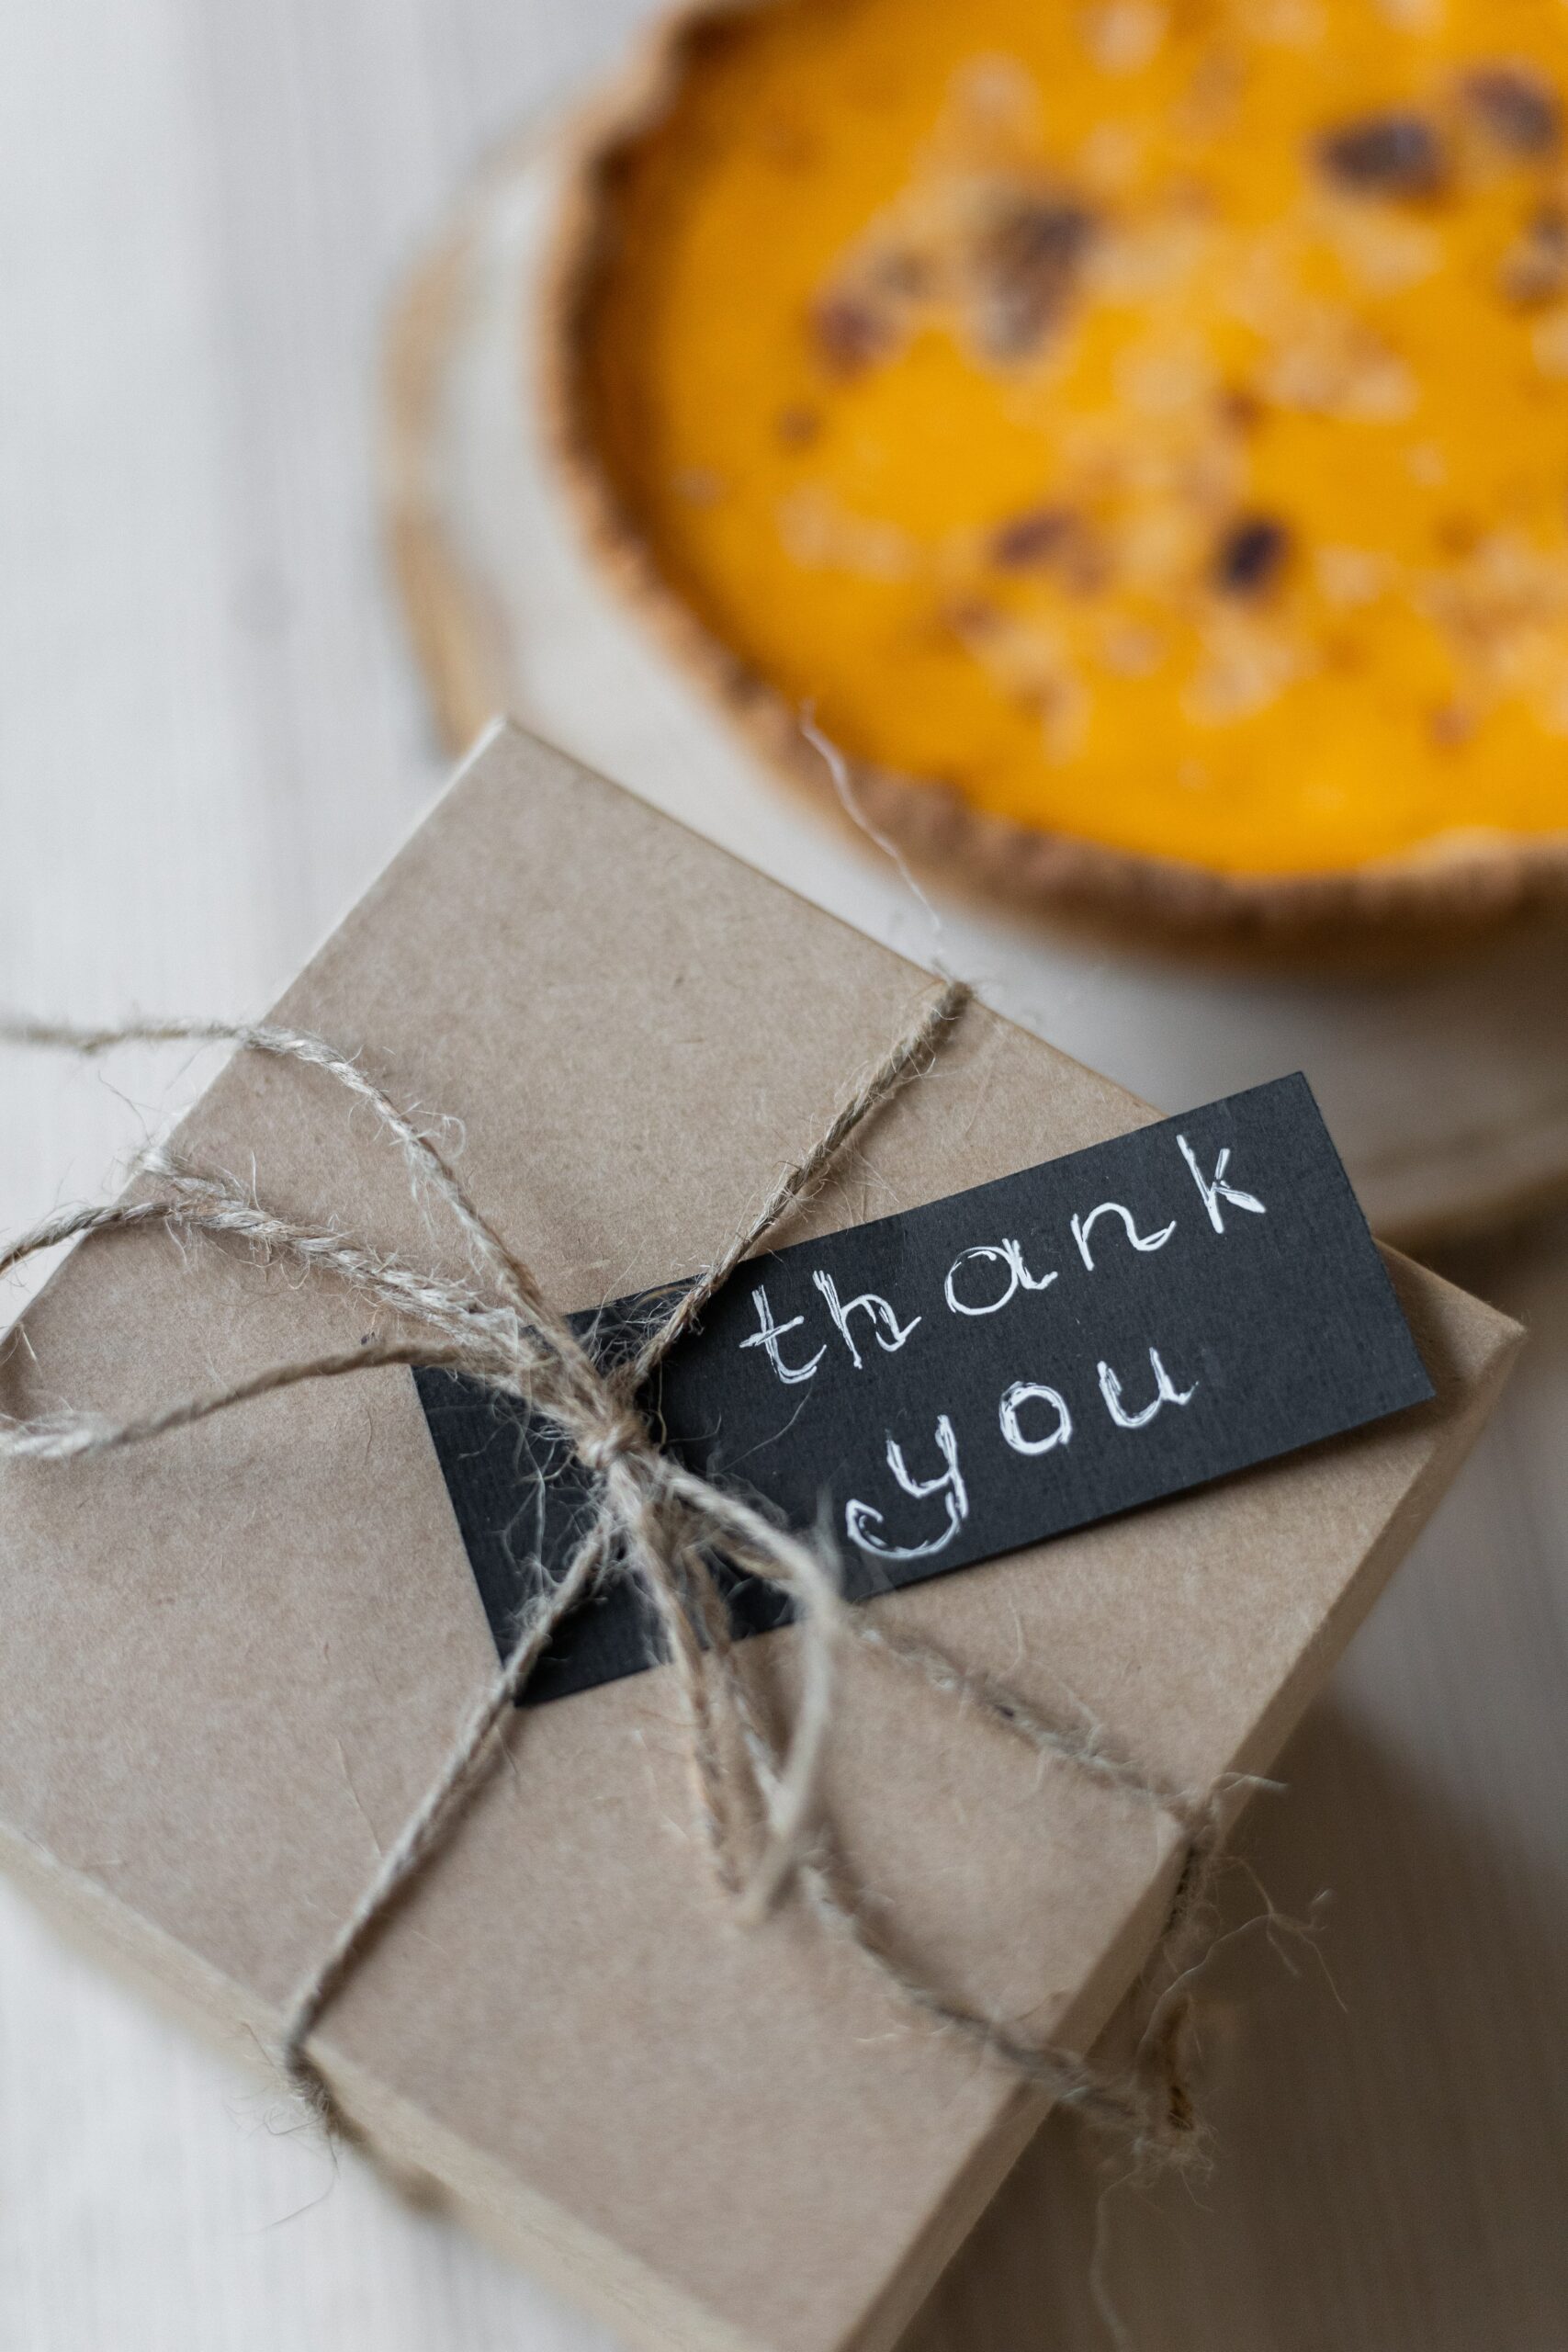 A photo of a small cardboard box wrapped in twine, which is woven into a bow at the top. It holds into place a small note with white text on black paper that writes “thank you.” An orange casserole dish is blurred in the background.